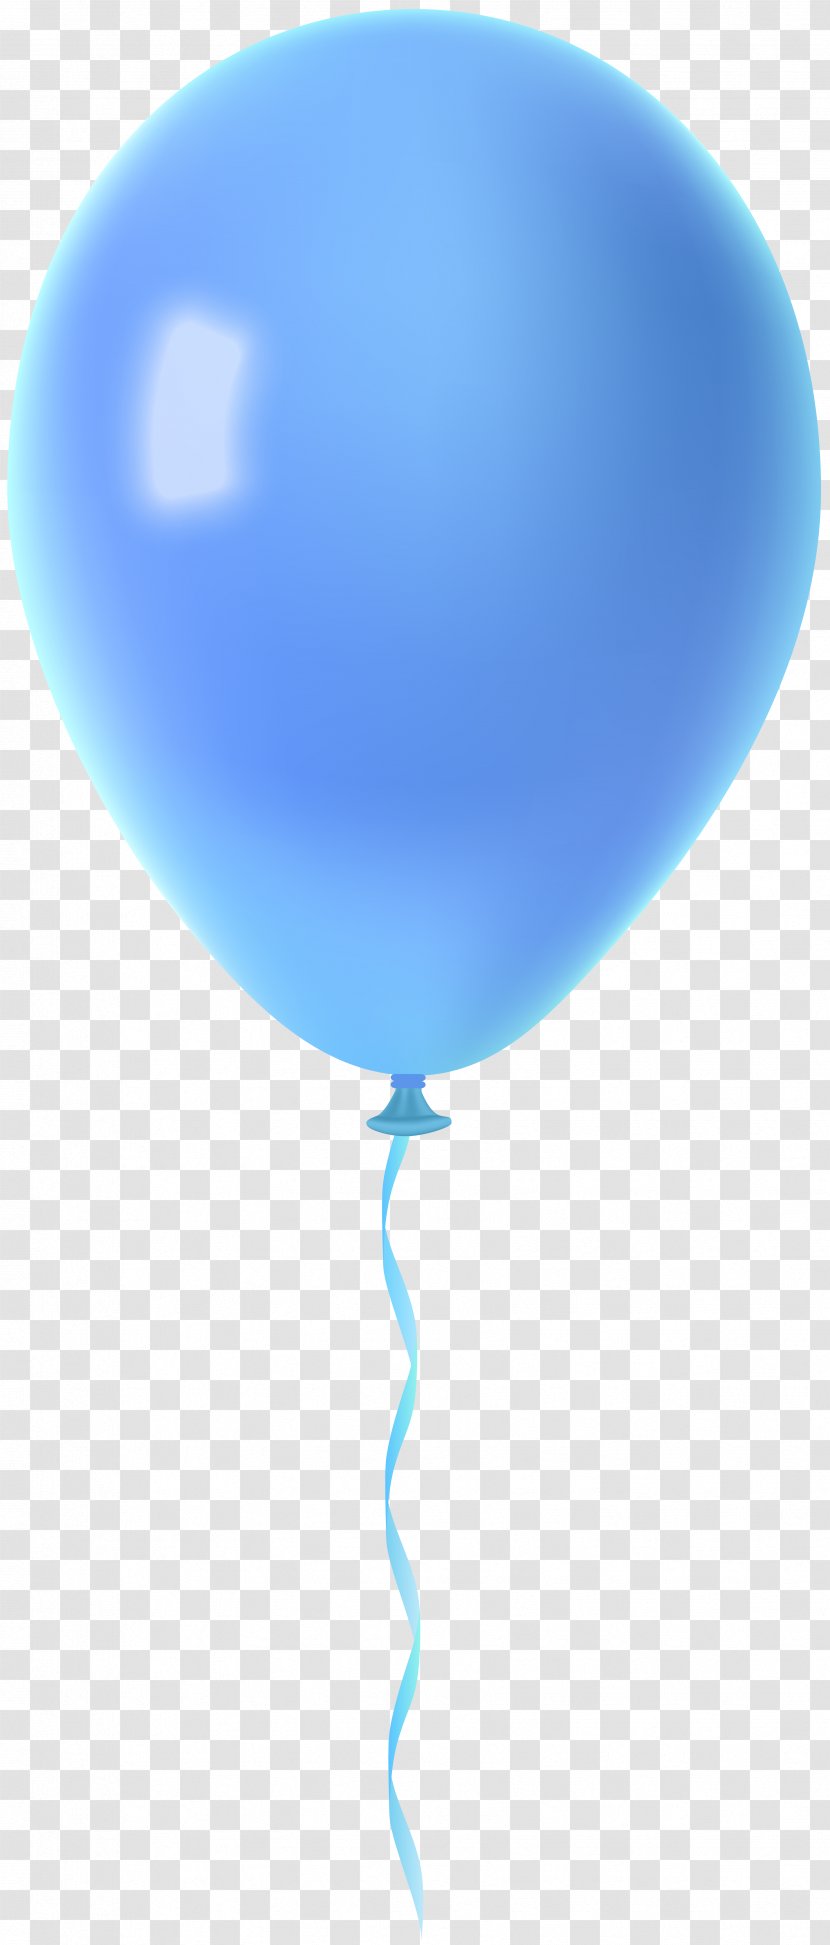 Balloon Blue Clip Art - Itsourtreecom - Yellow And Balloons Transparent PNG